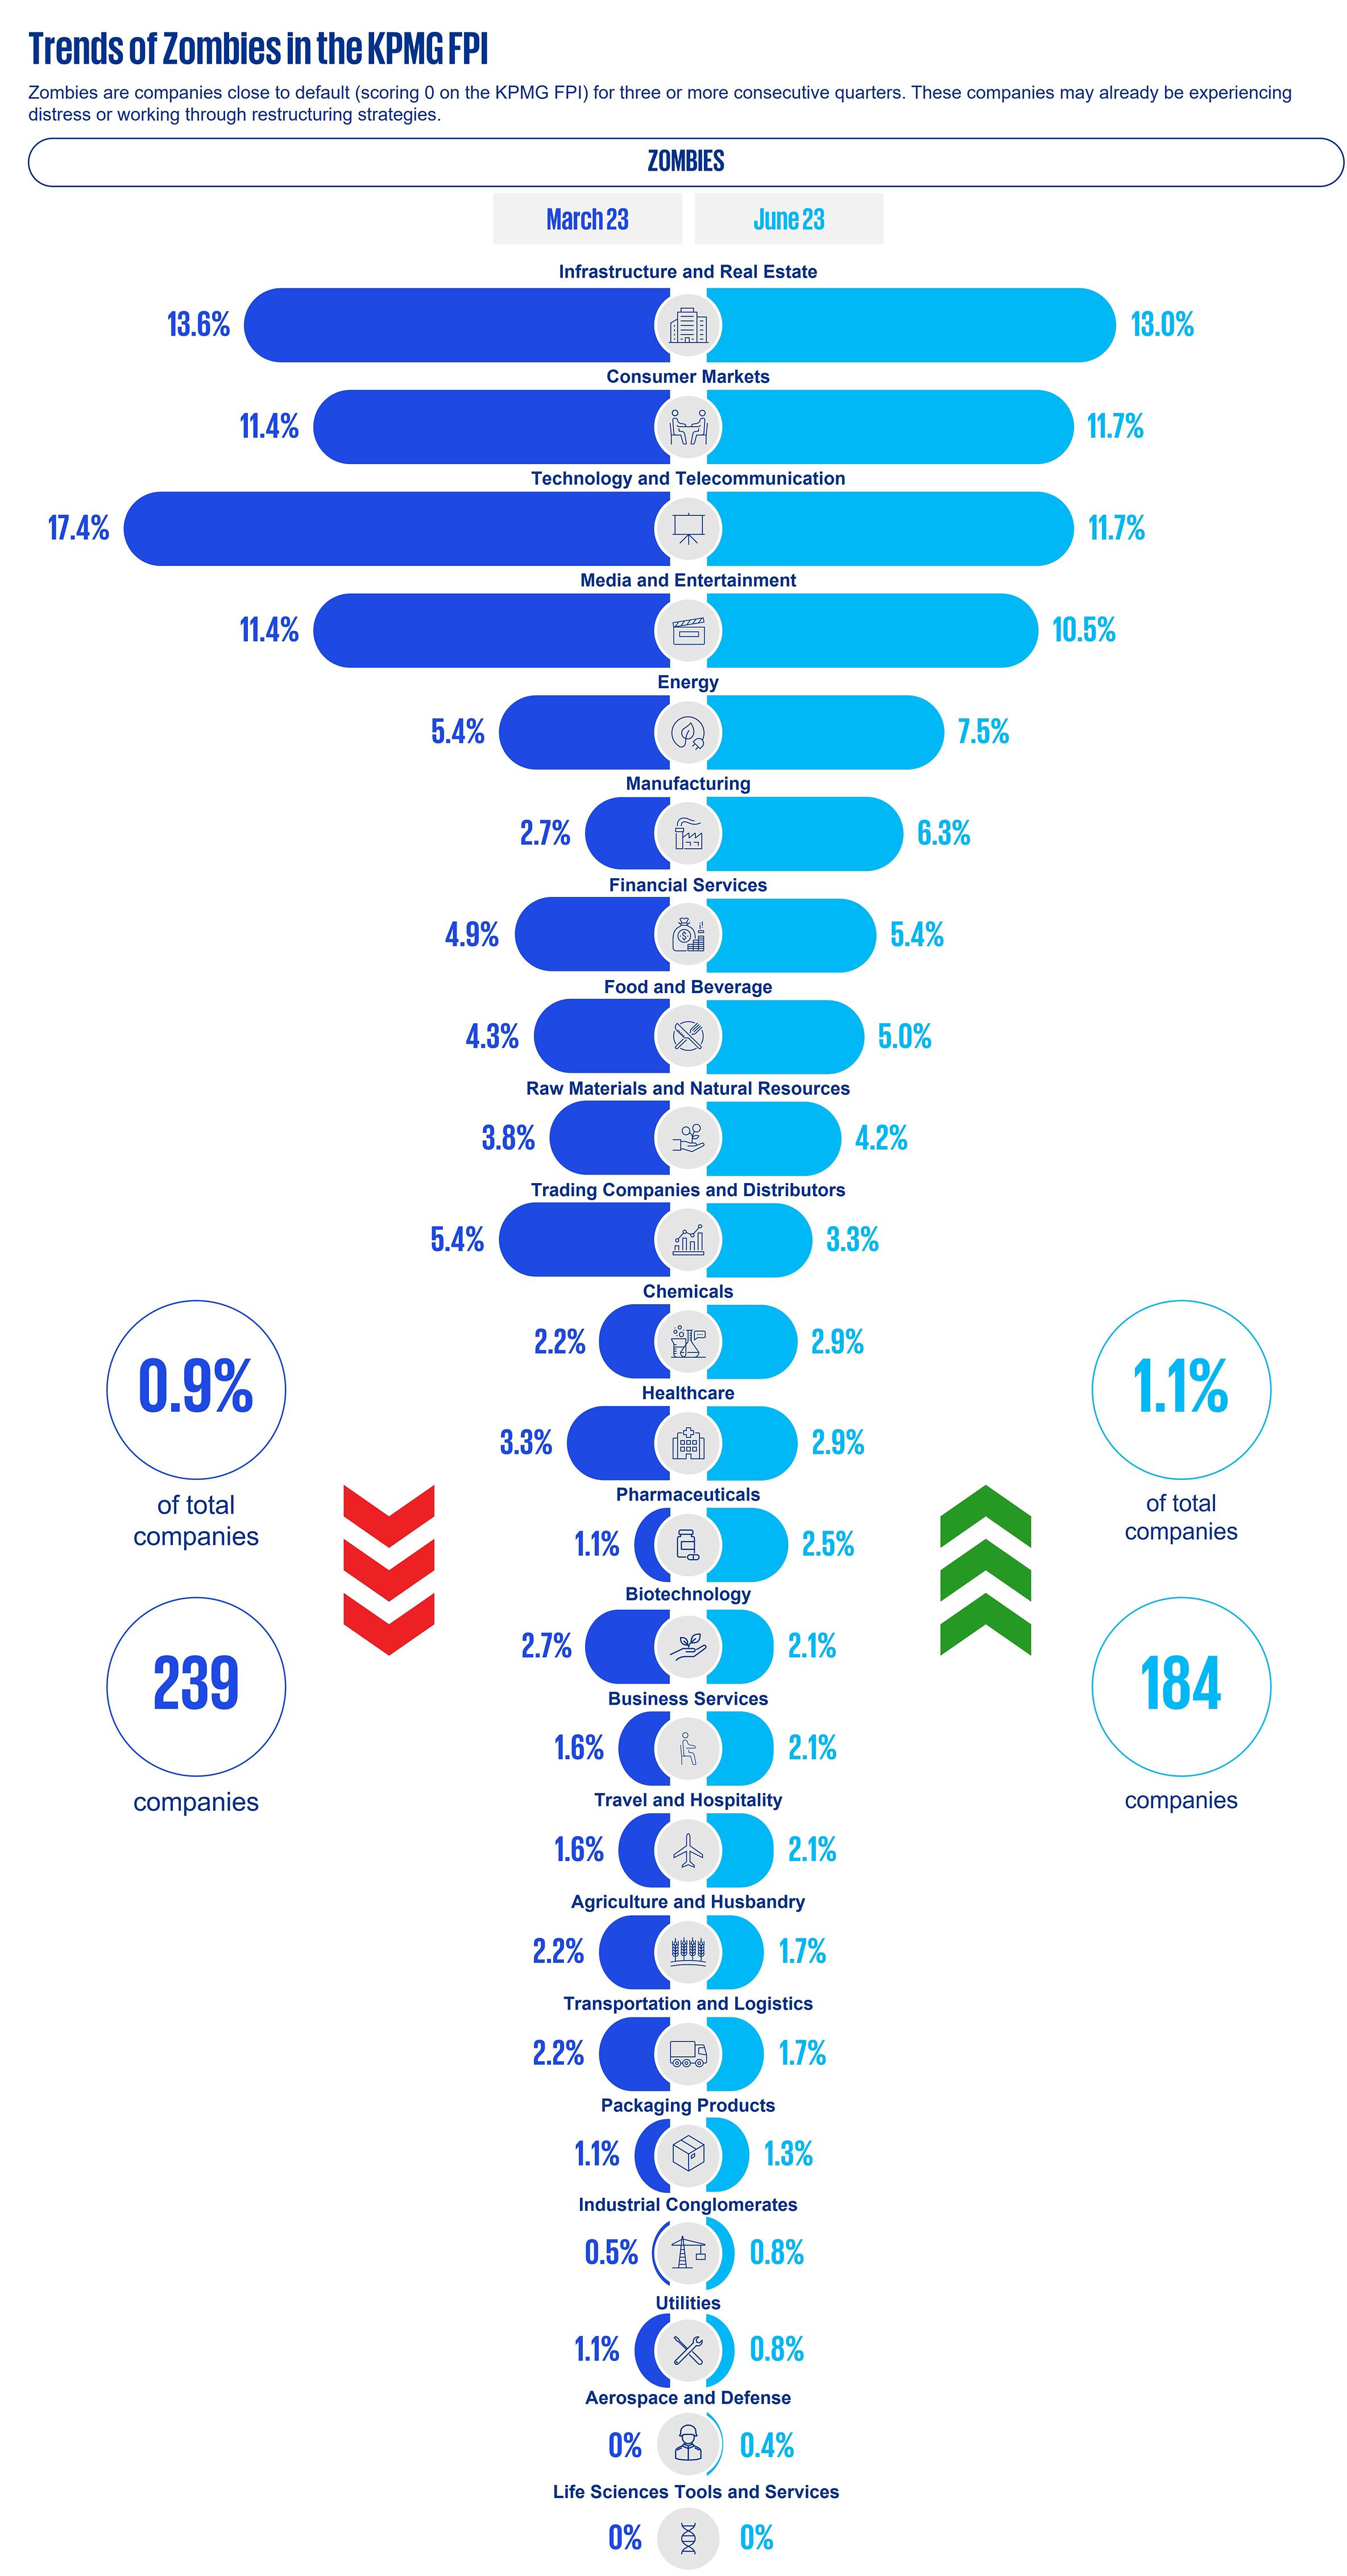 id-kpmg-fpi-trends-of-zombies